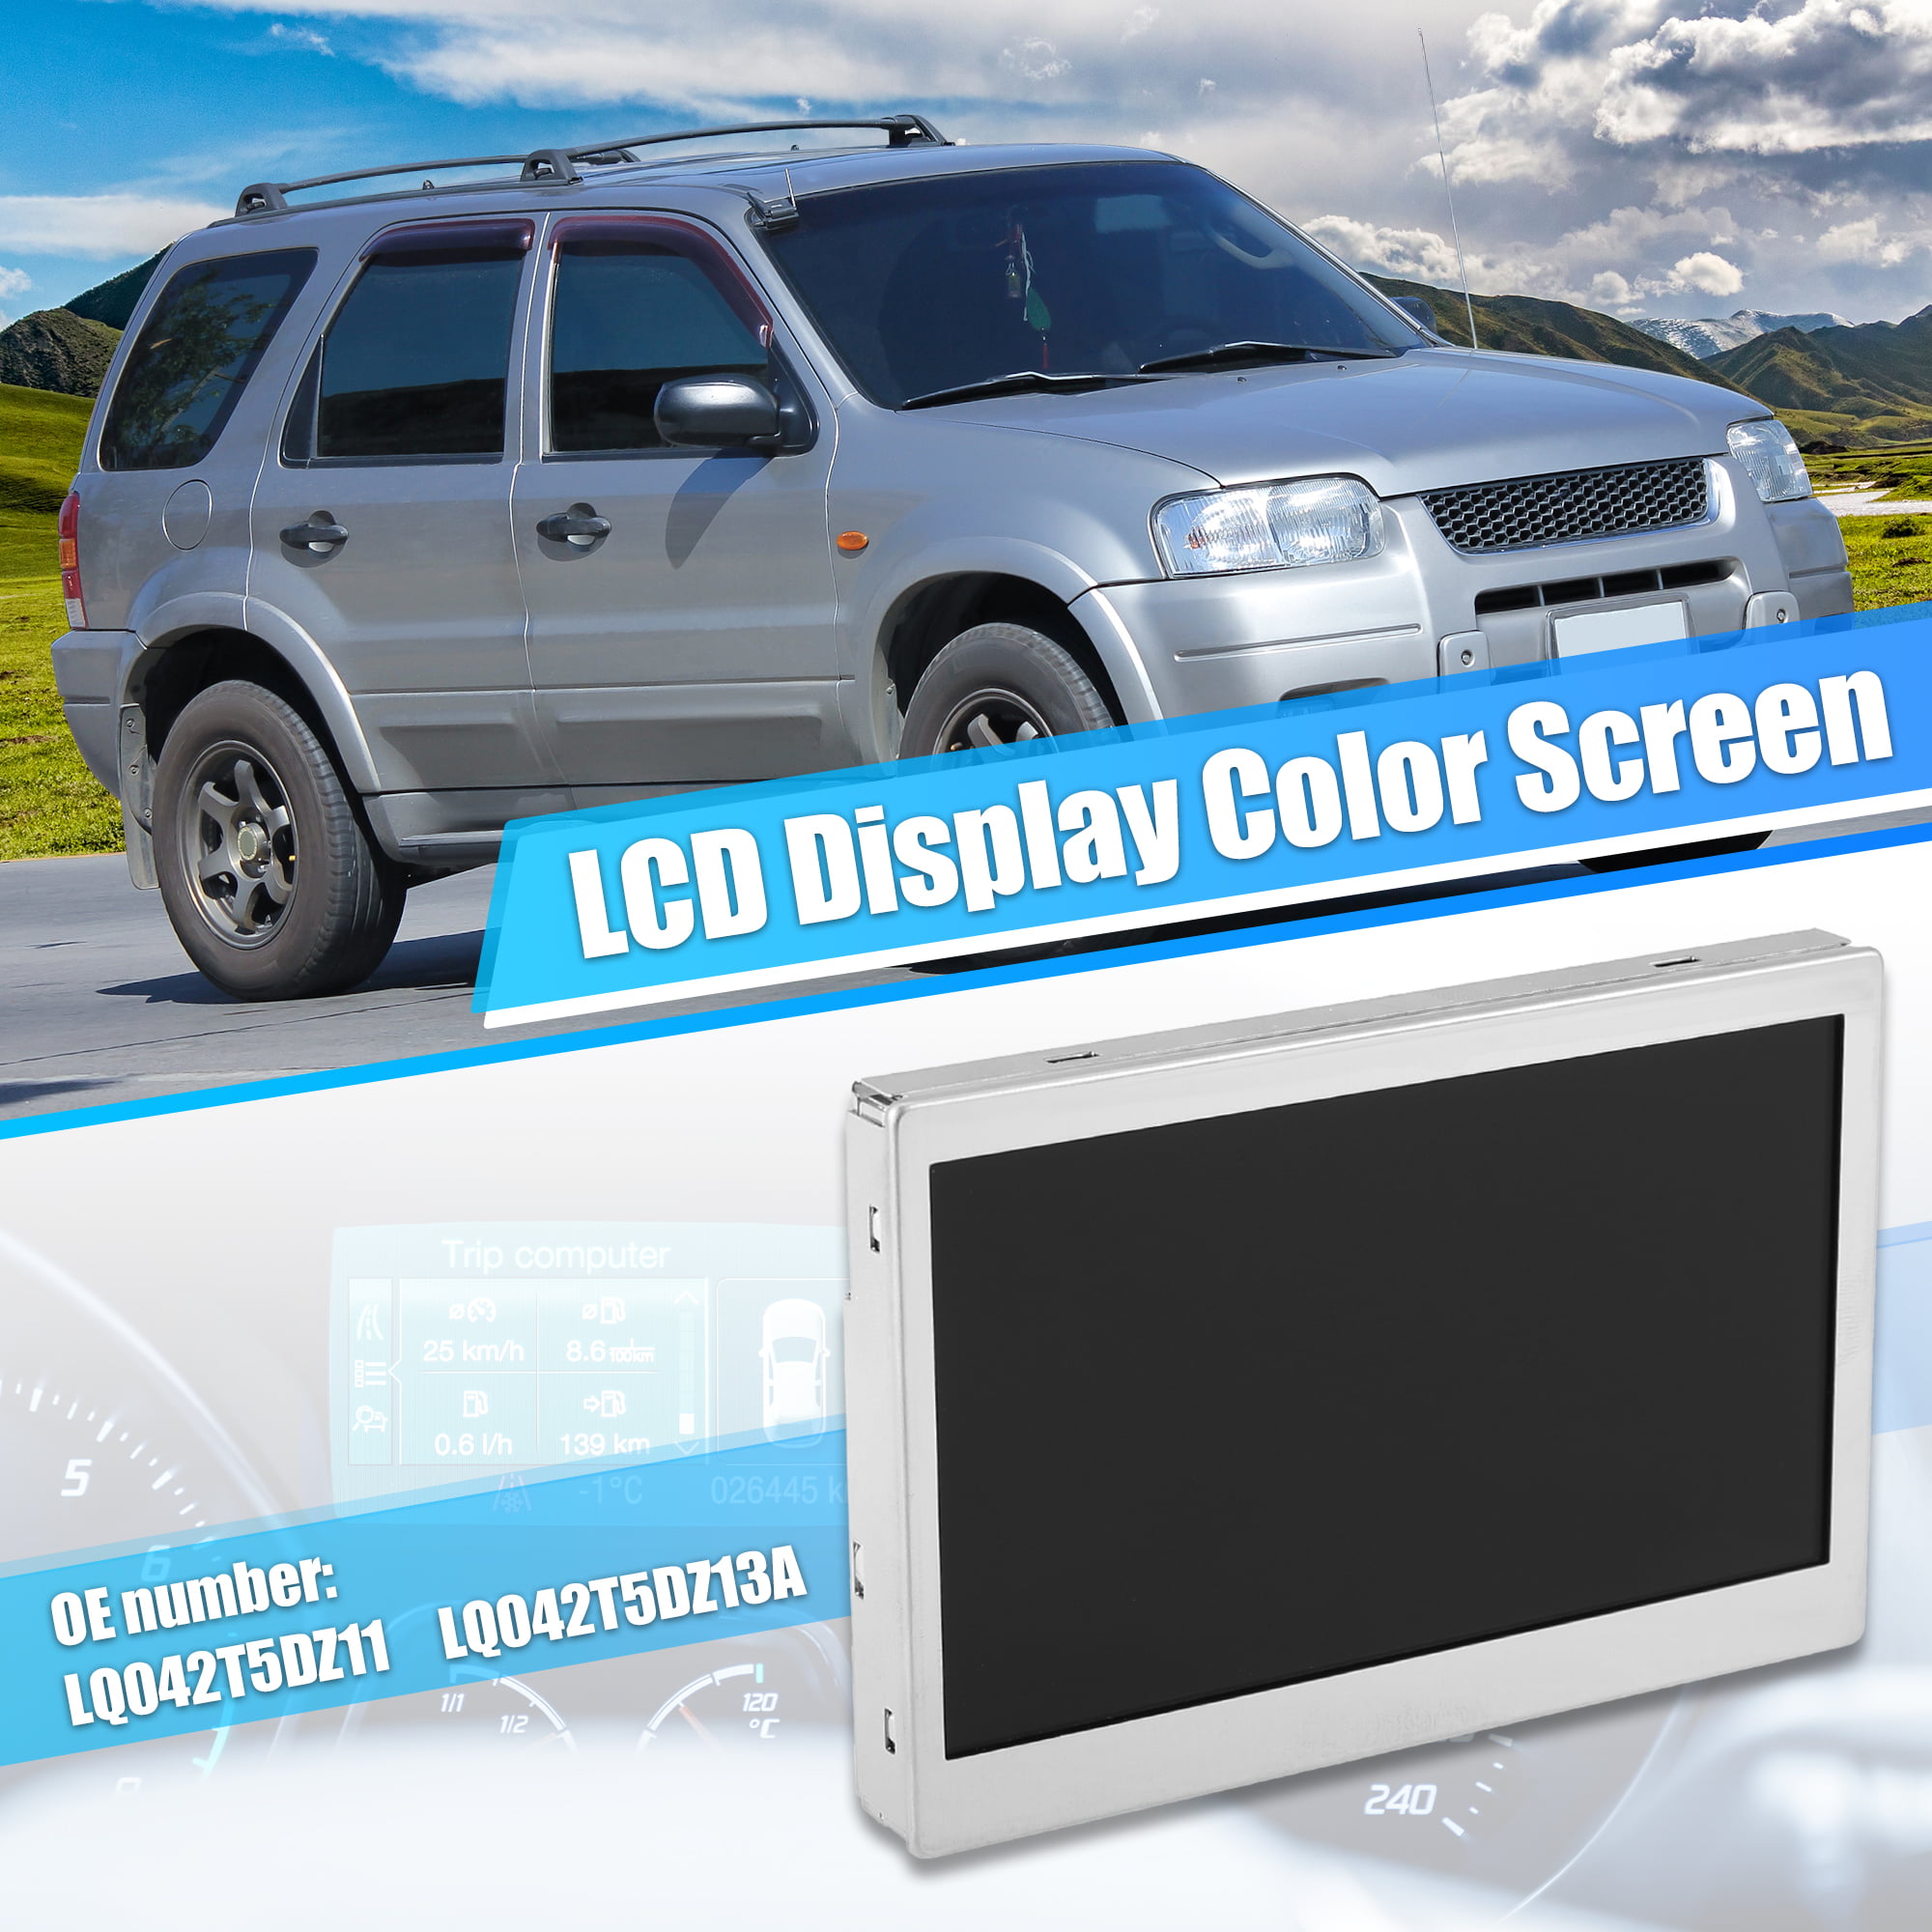 Rlfearl LCD Display Color Screen Compatible with Ford Escape Focus 150MPH Speedometer Instrument LQ042T5DZ11 LQ042T5DZ13A 